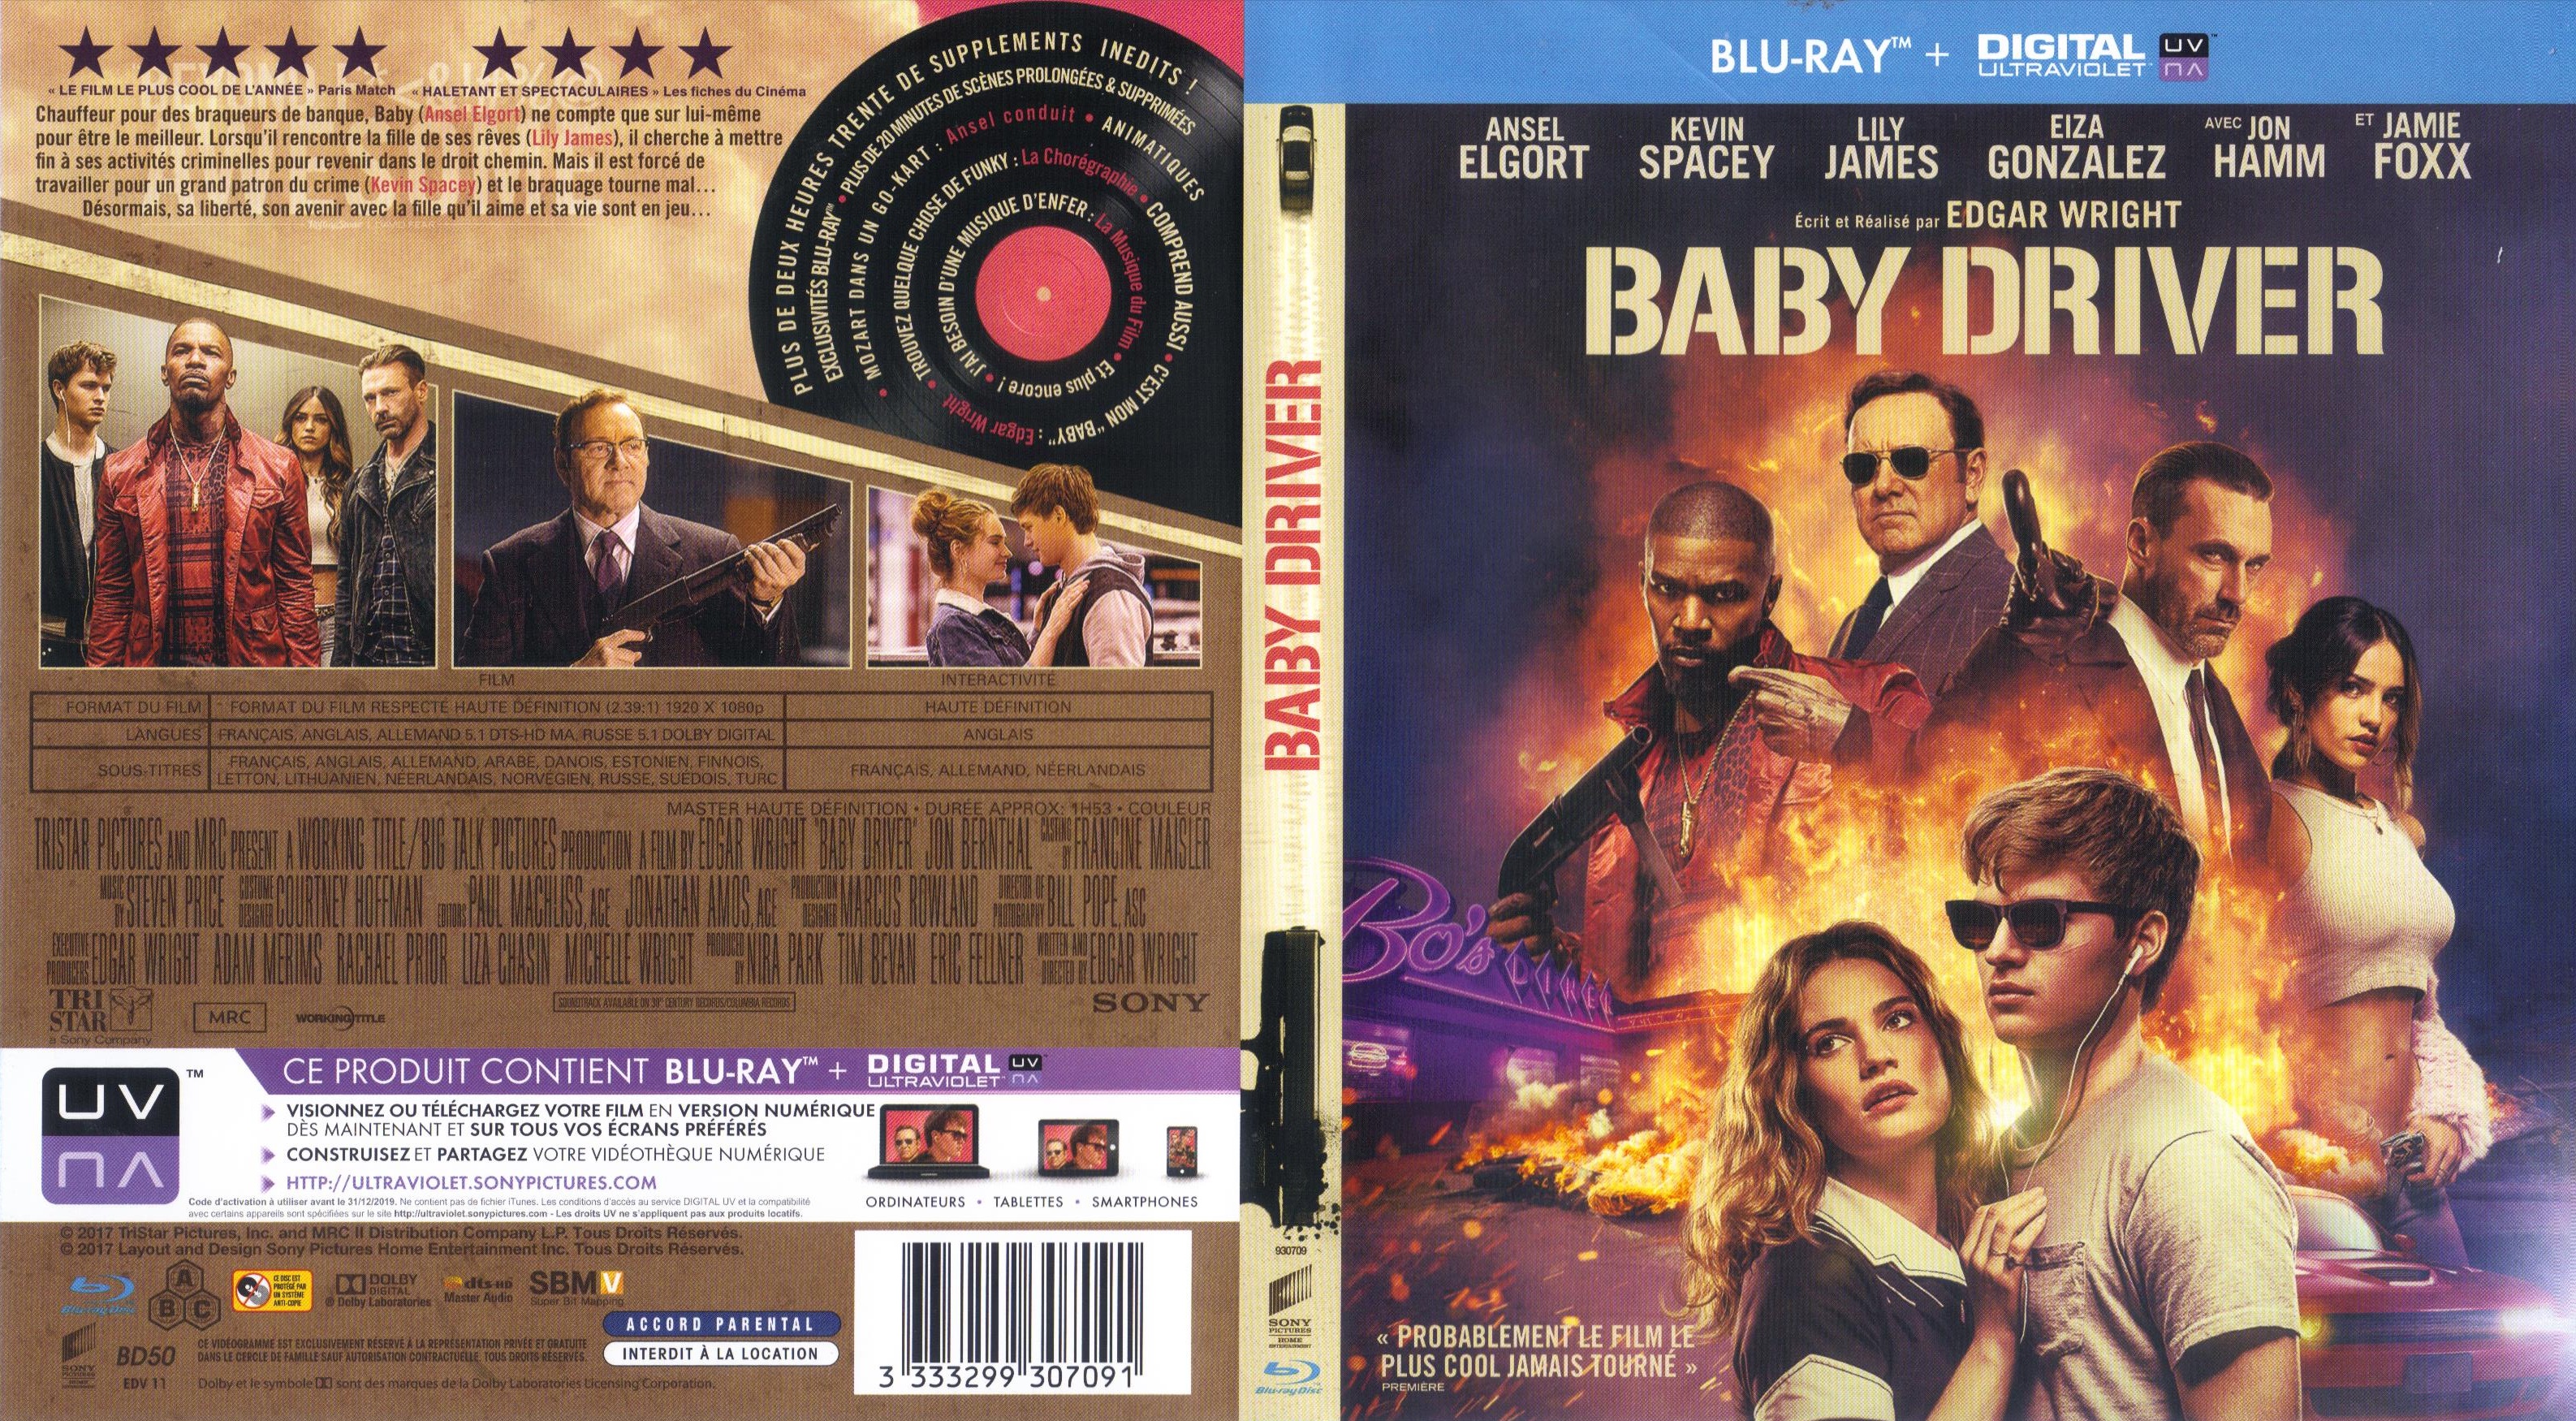 Jaquette DVD Baby Driver (BLU-RAY)